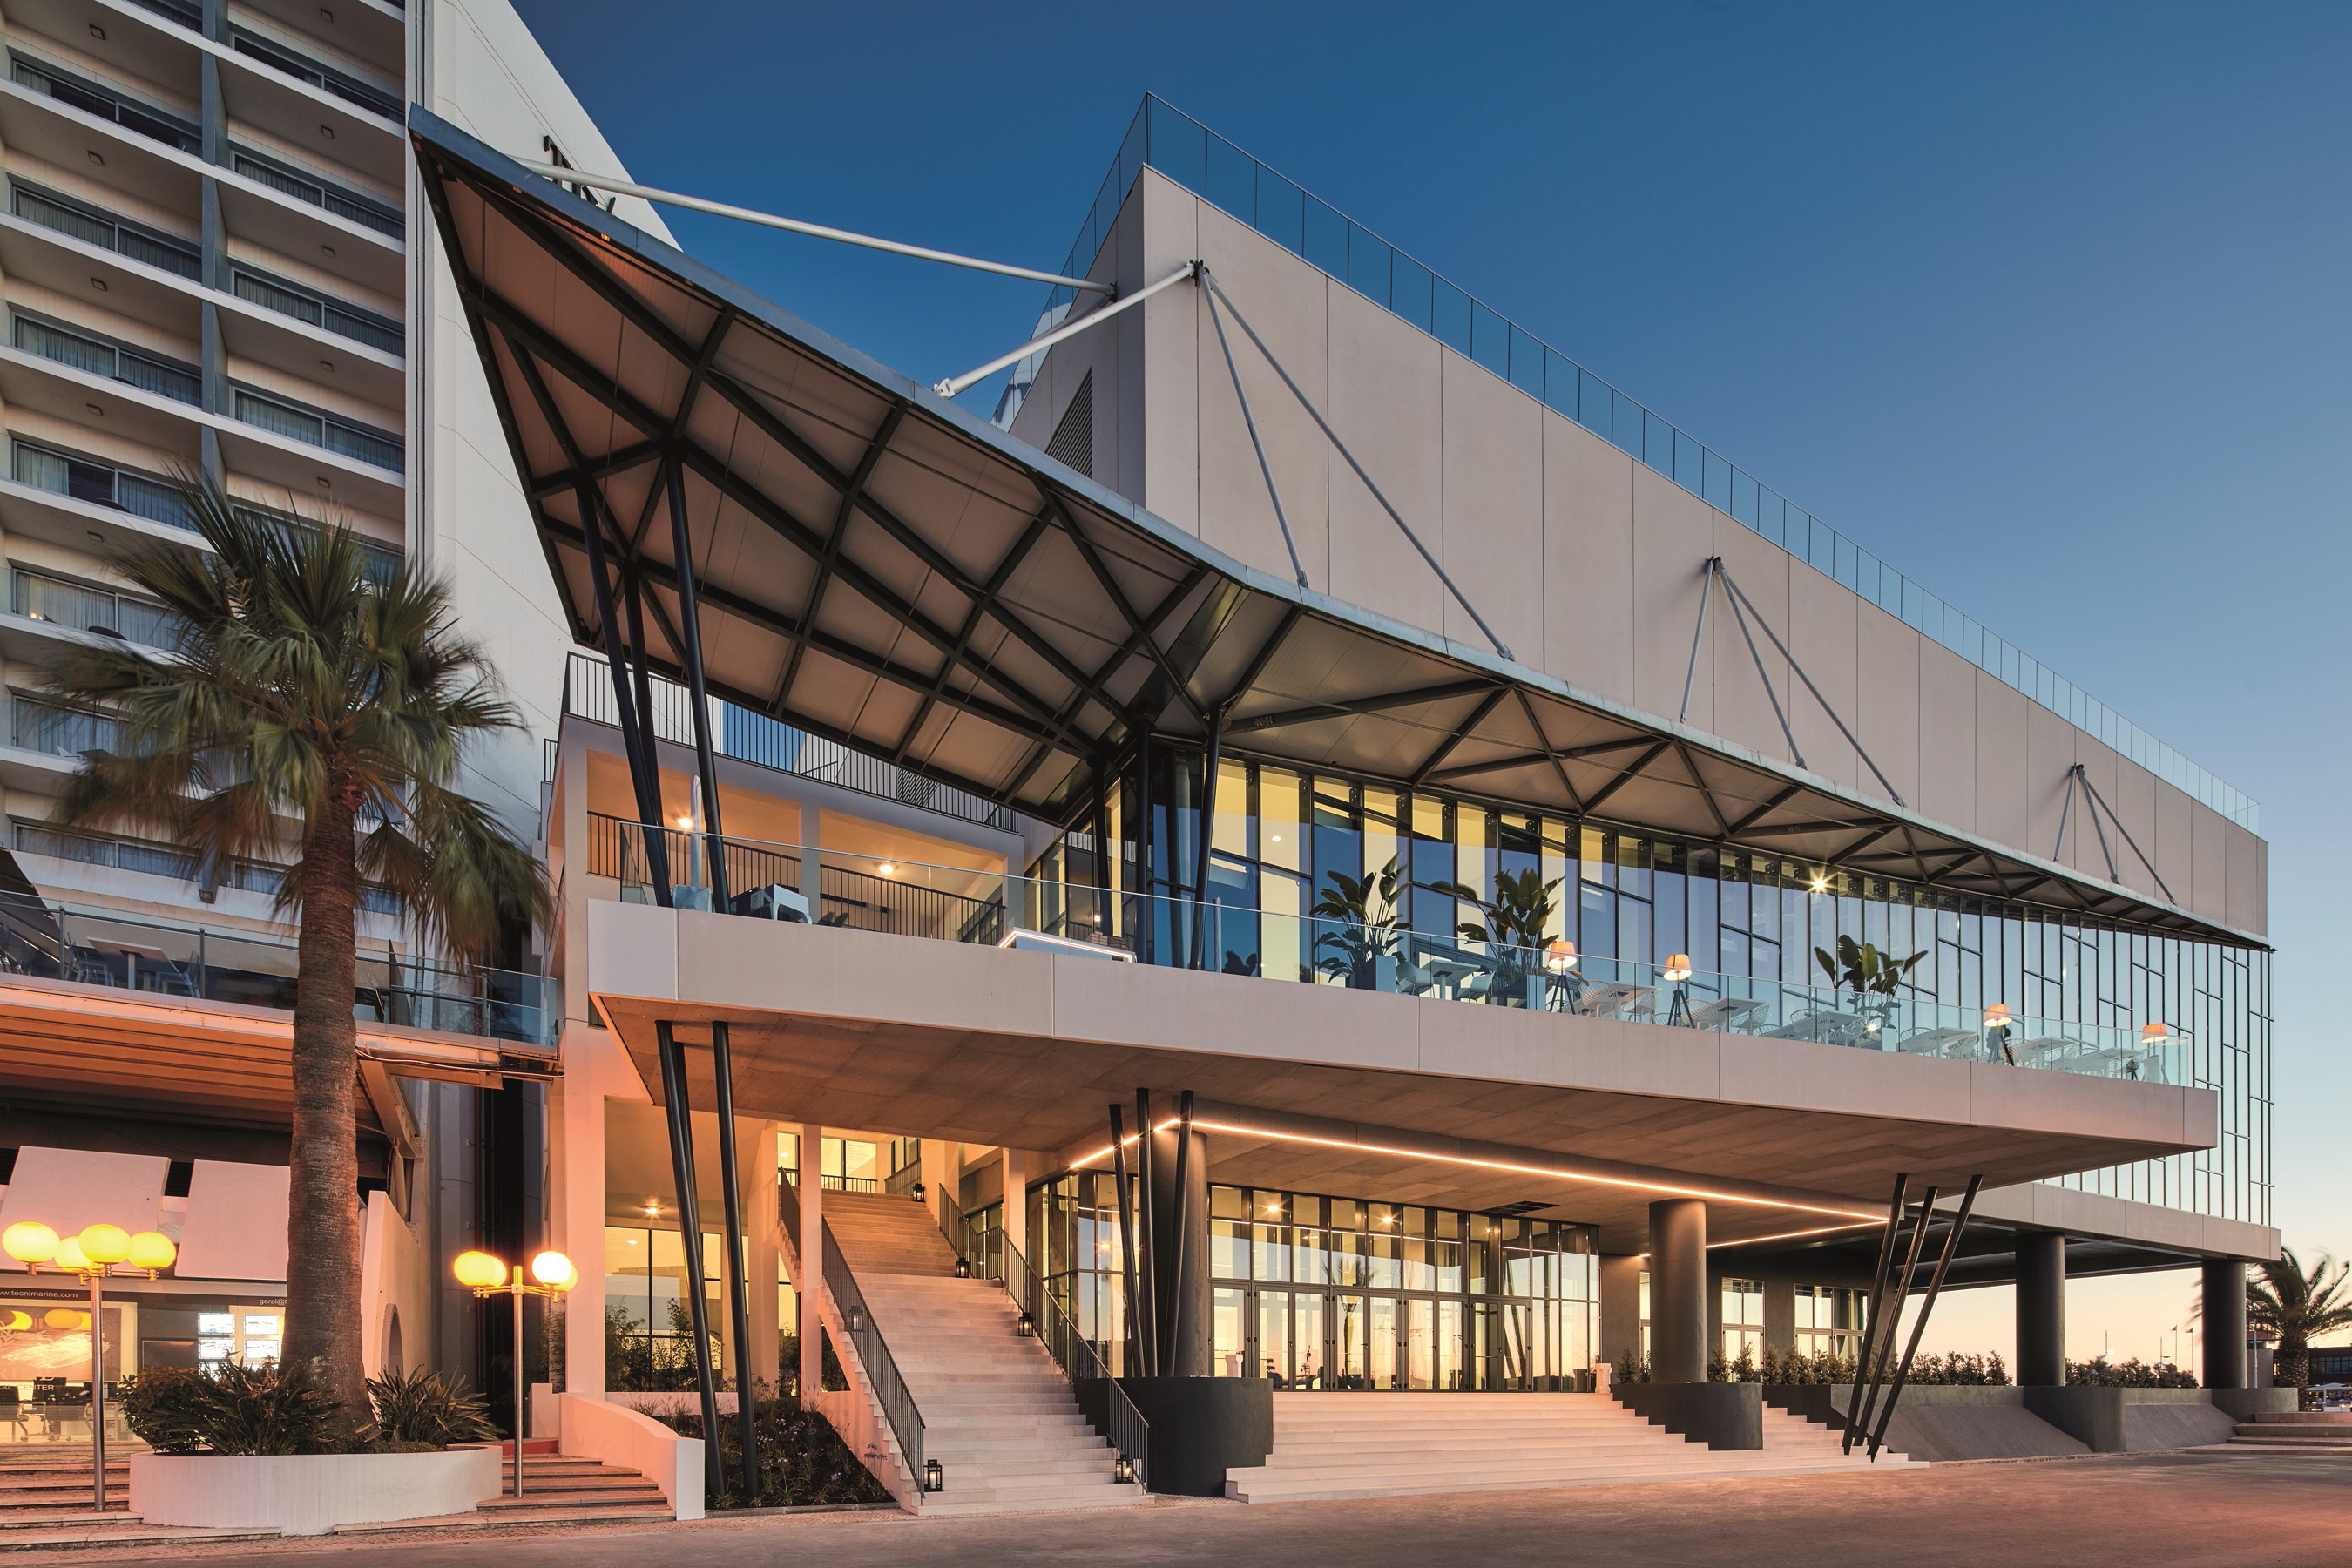 The Algarve Congress Centre, one of the largest and most modern MICE facilities in Portugal, has opened next to Vilamoura Marina and the Tivoli Marina Vilamoura Algarve Resort. Click to enlarge.